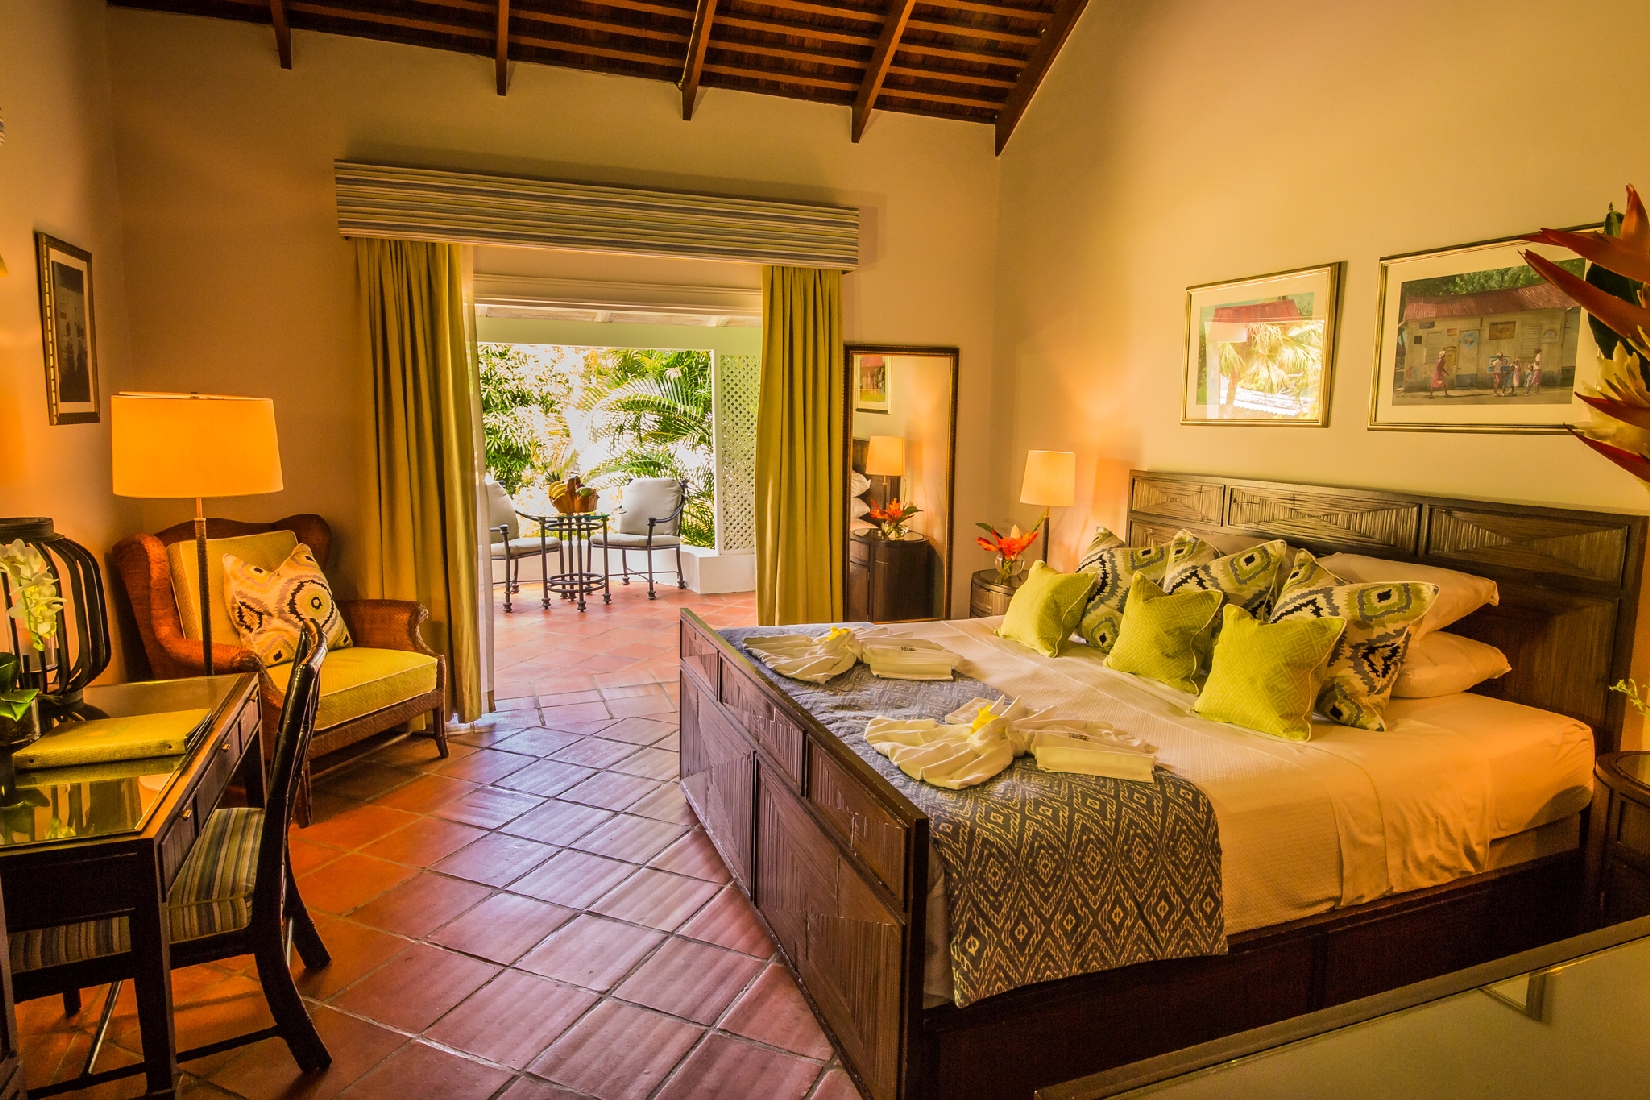 Deluxe cottage interiors at East Winds, St Lucia